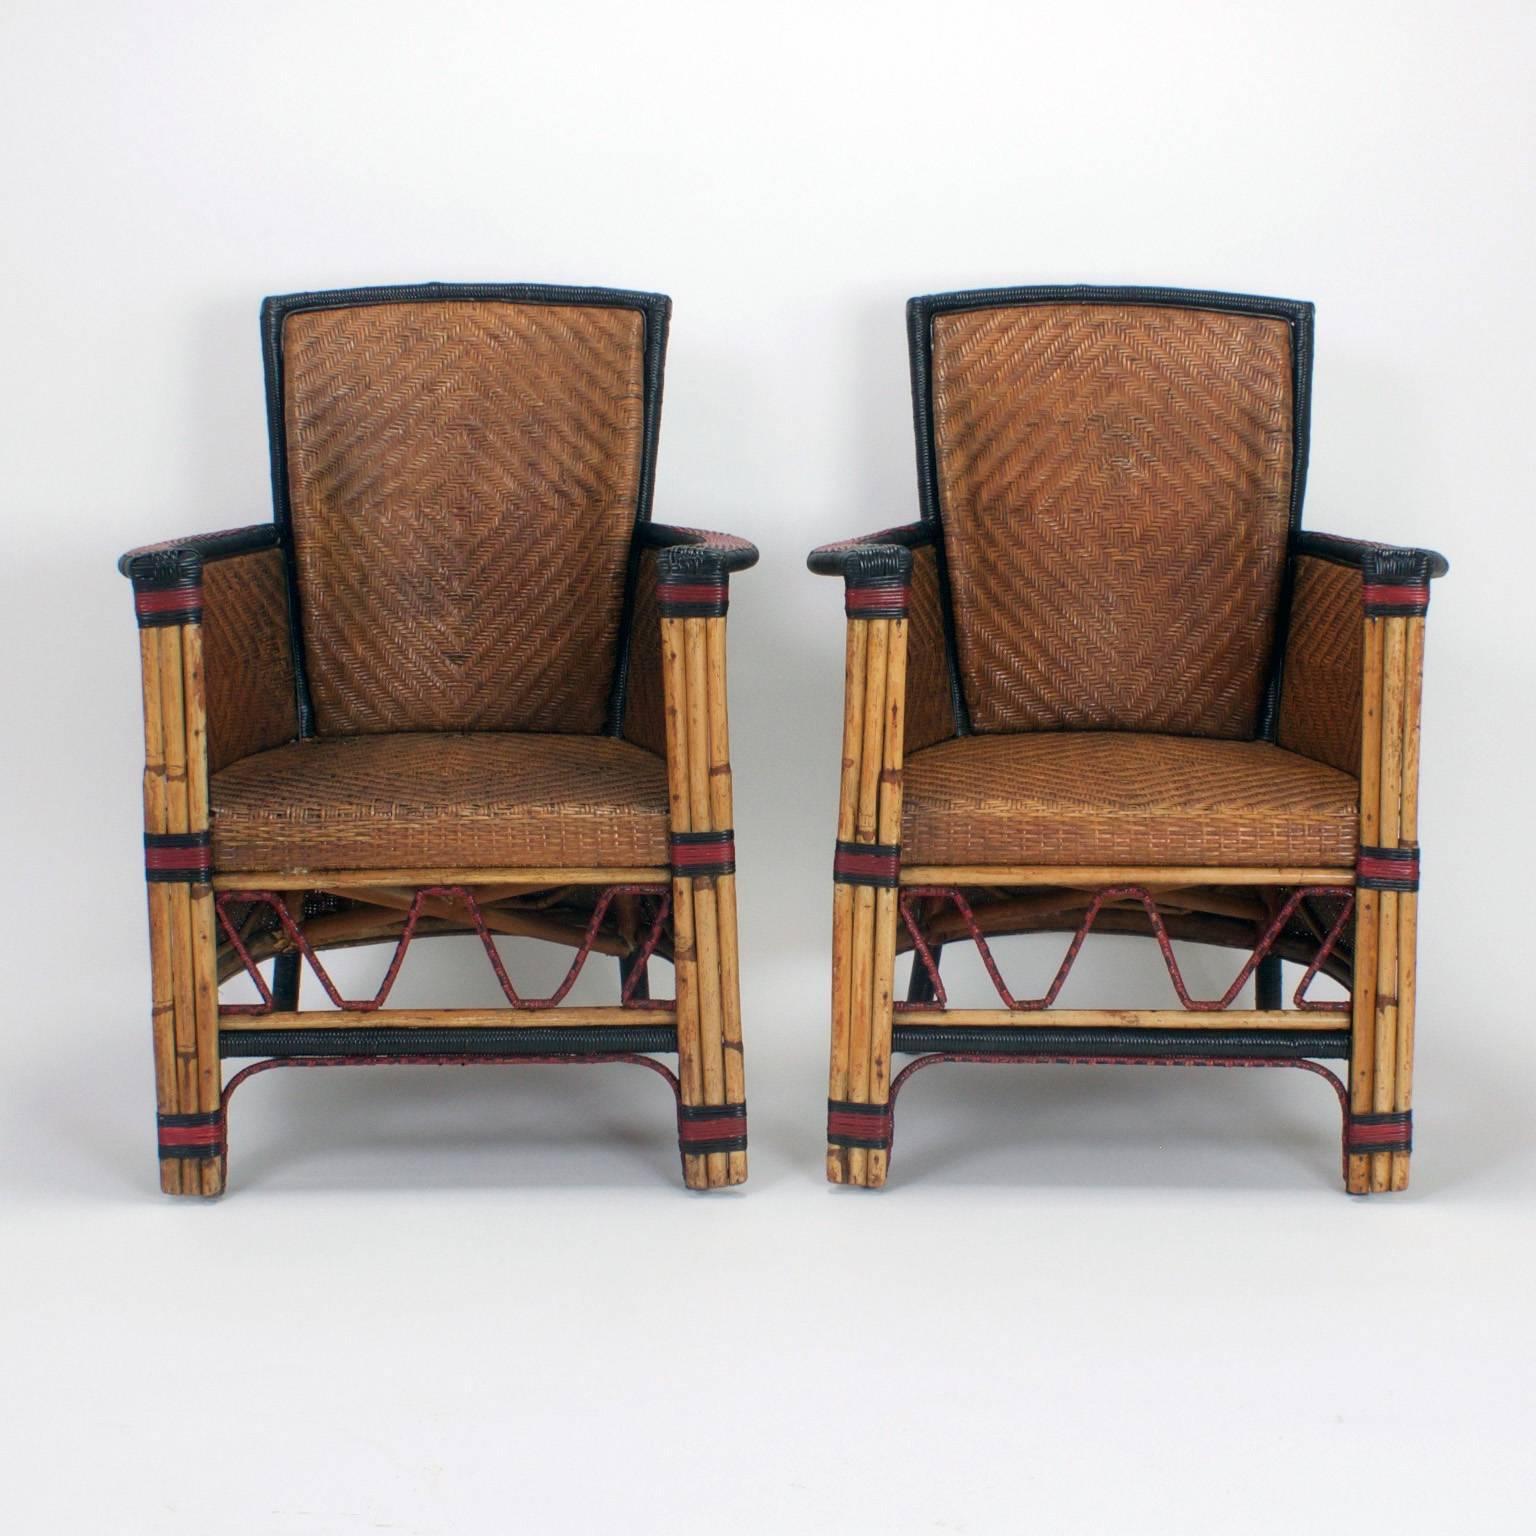 Rare and possibly the only pair of armchairs of this type. These chairs are crafted with wicker, reed, and bamboo. These stylish Art Deco type chairs have a strong 